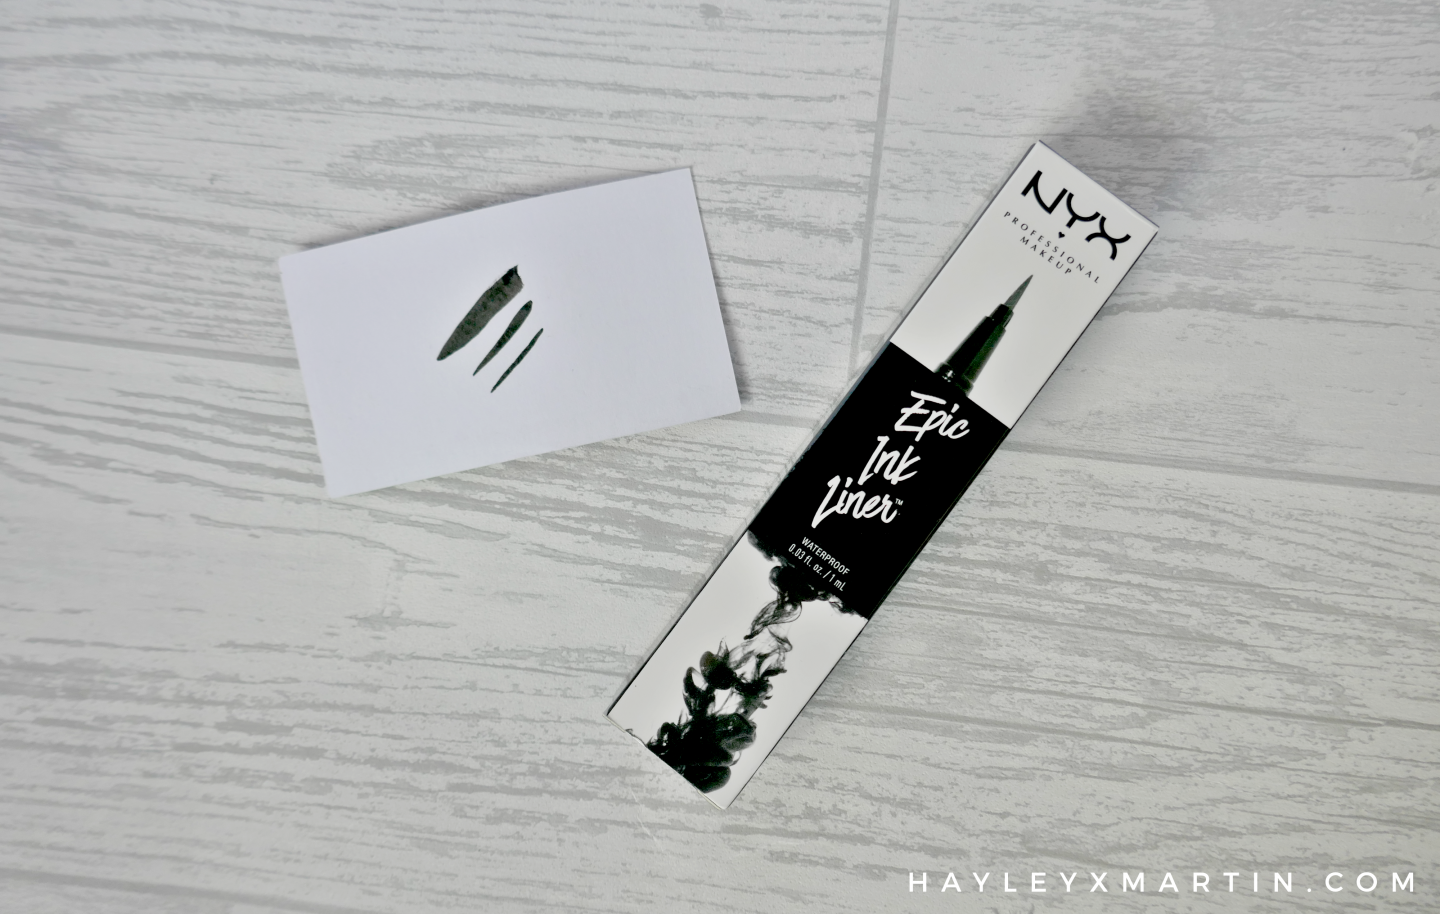 hayleyxmartin | NYX EPIC INK LINER REVIEW